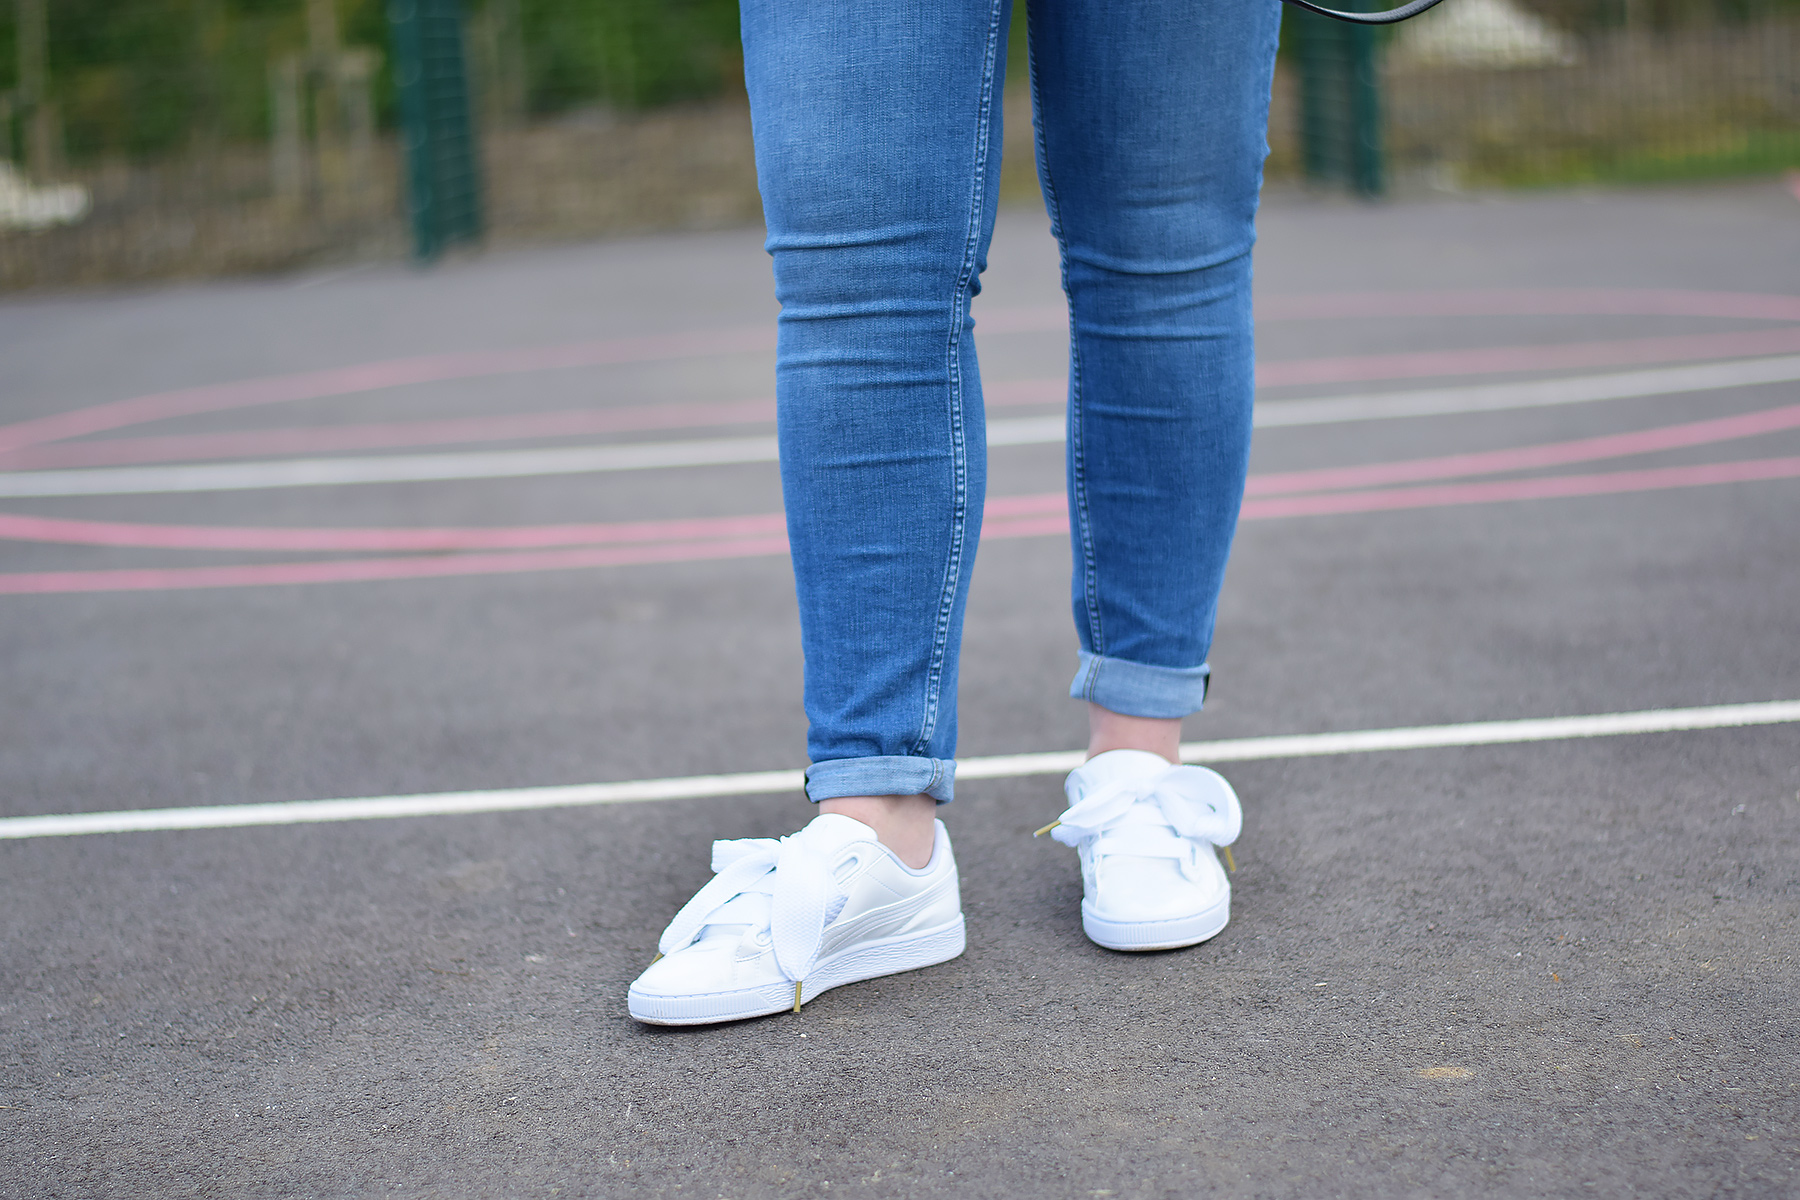 Puma Basket heart trainers and blue jeans outfit